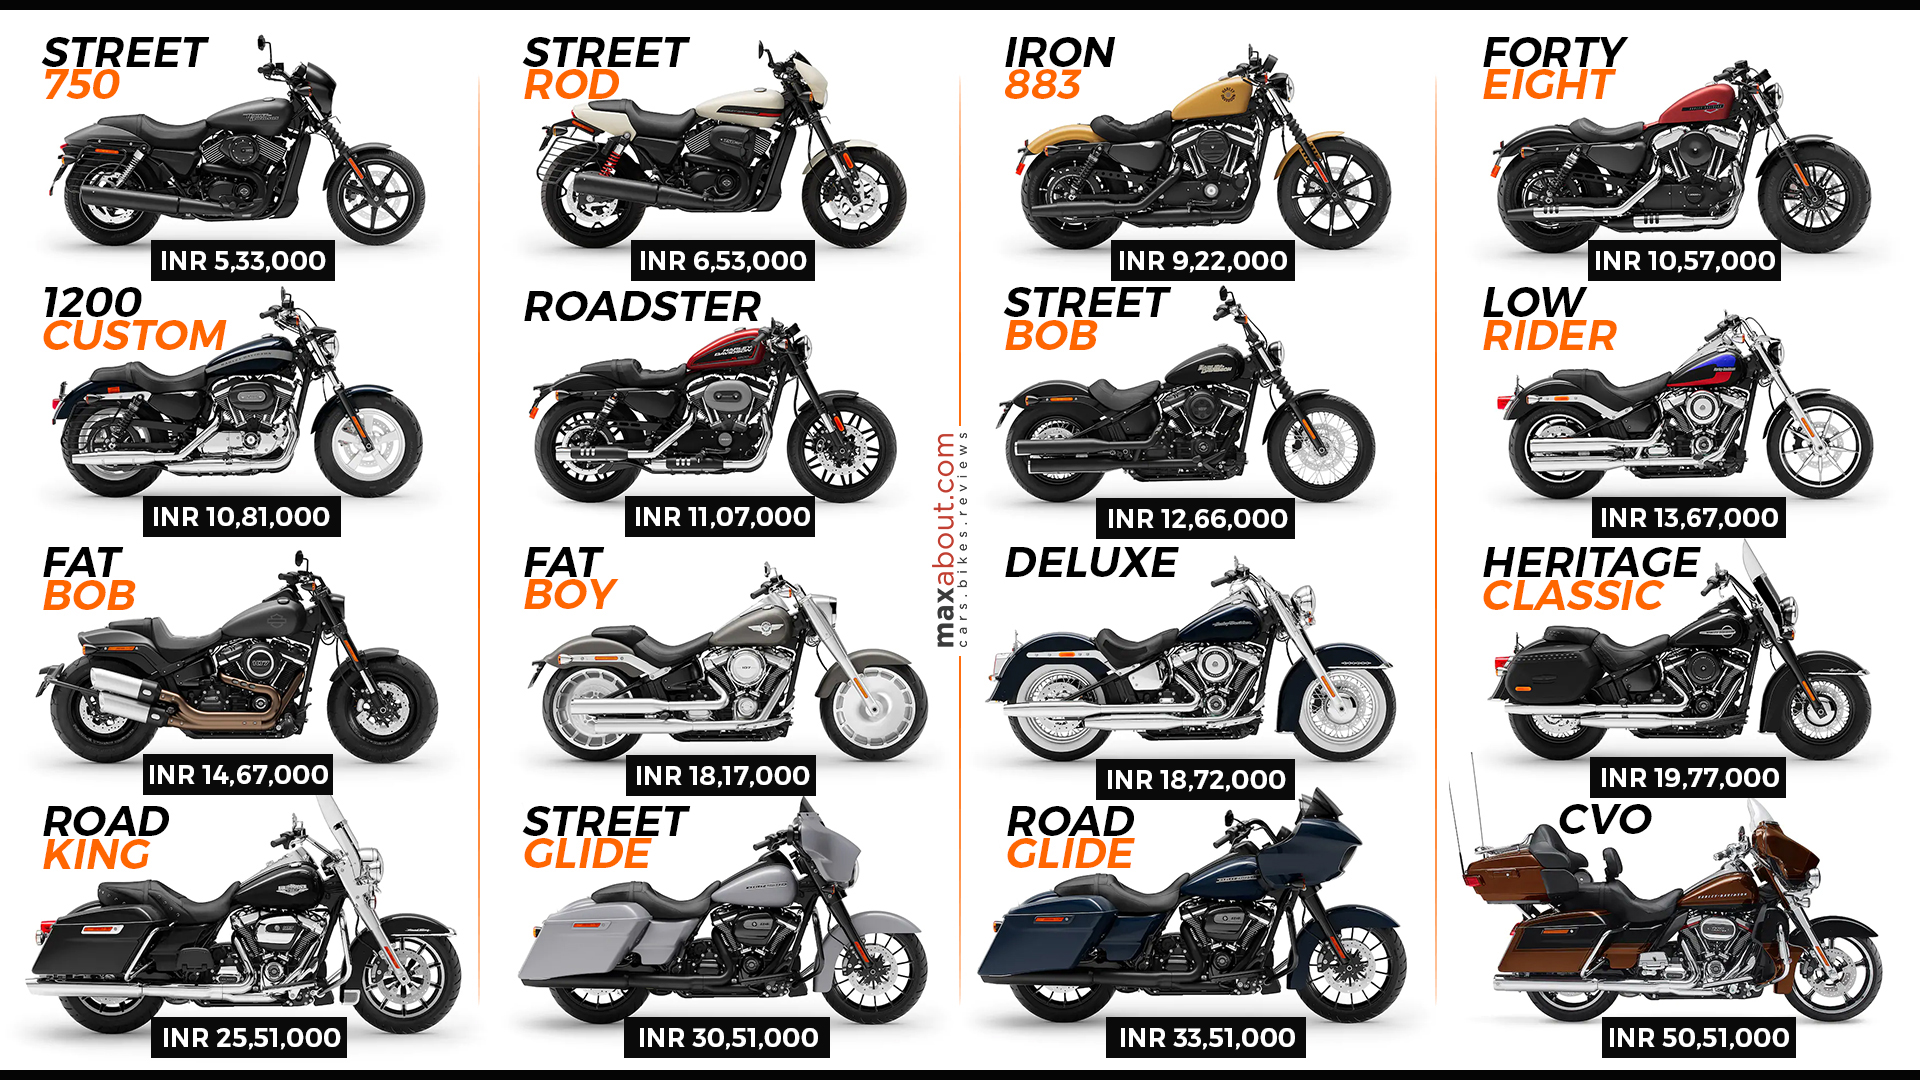 2019 Harley Davidson Motorcycles Price List In India